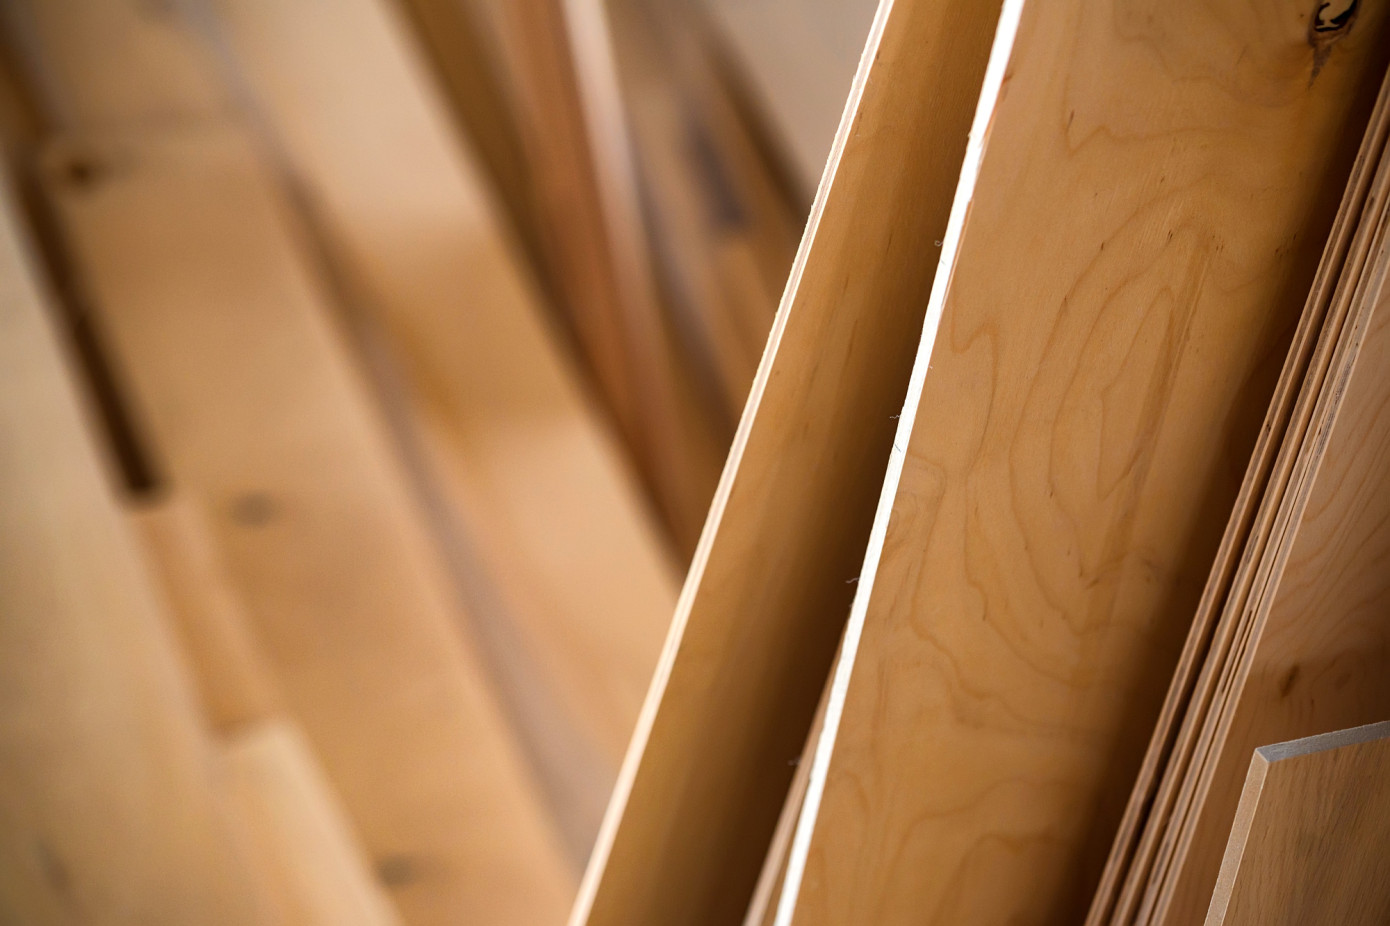 In January, price for plywood imported to UK loses 18%